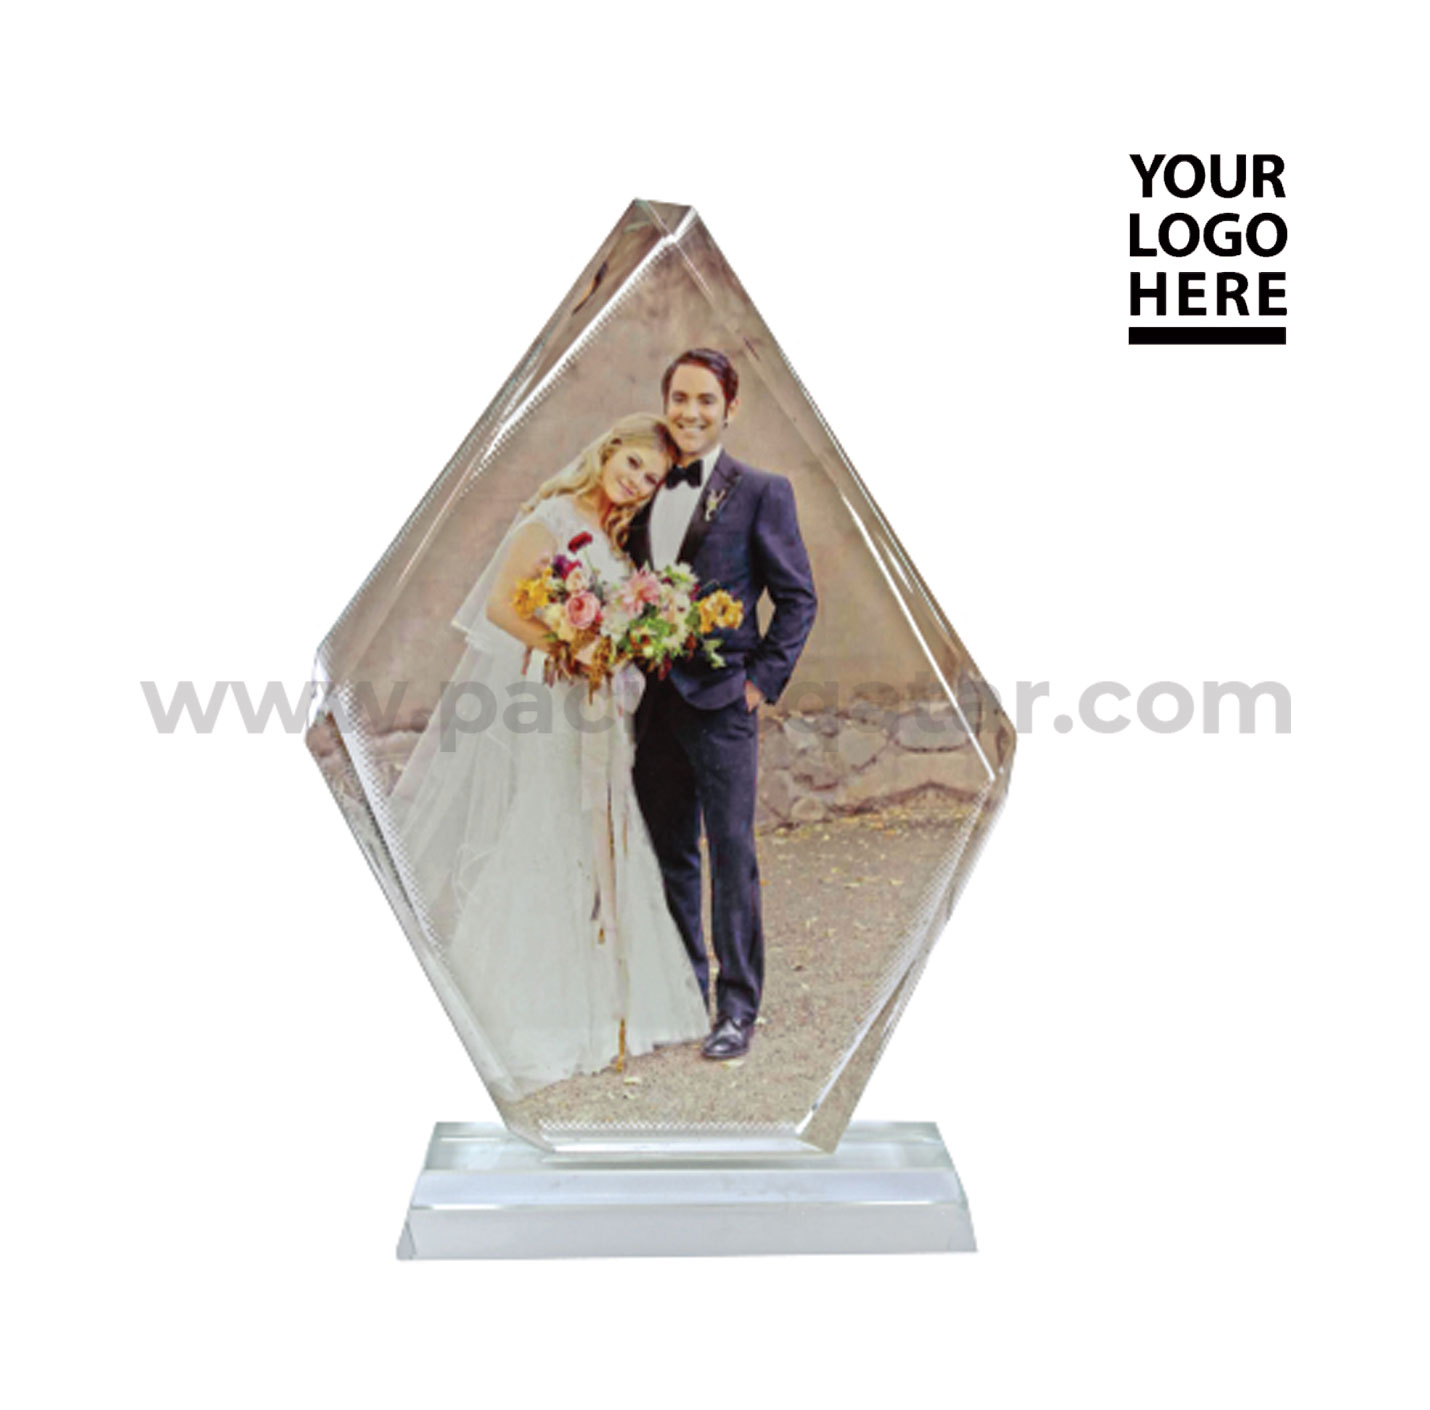 Sublimation Photo Crystal with personalized design